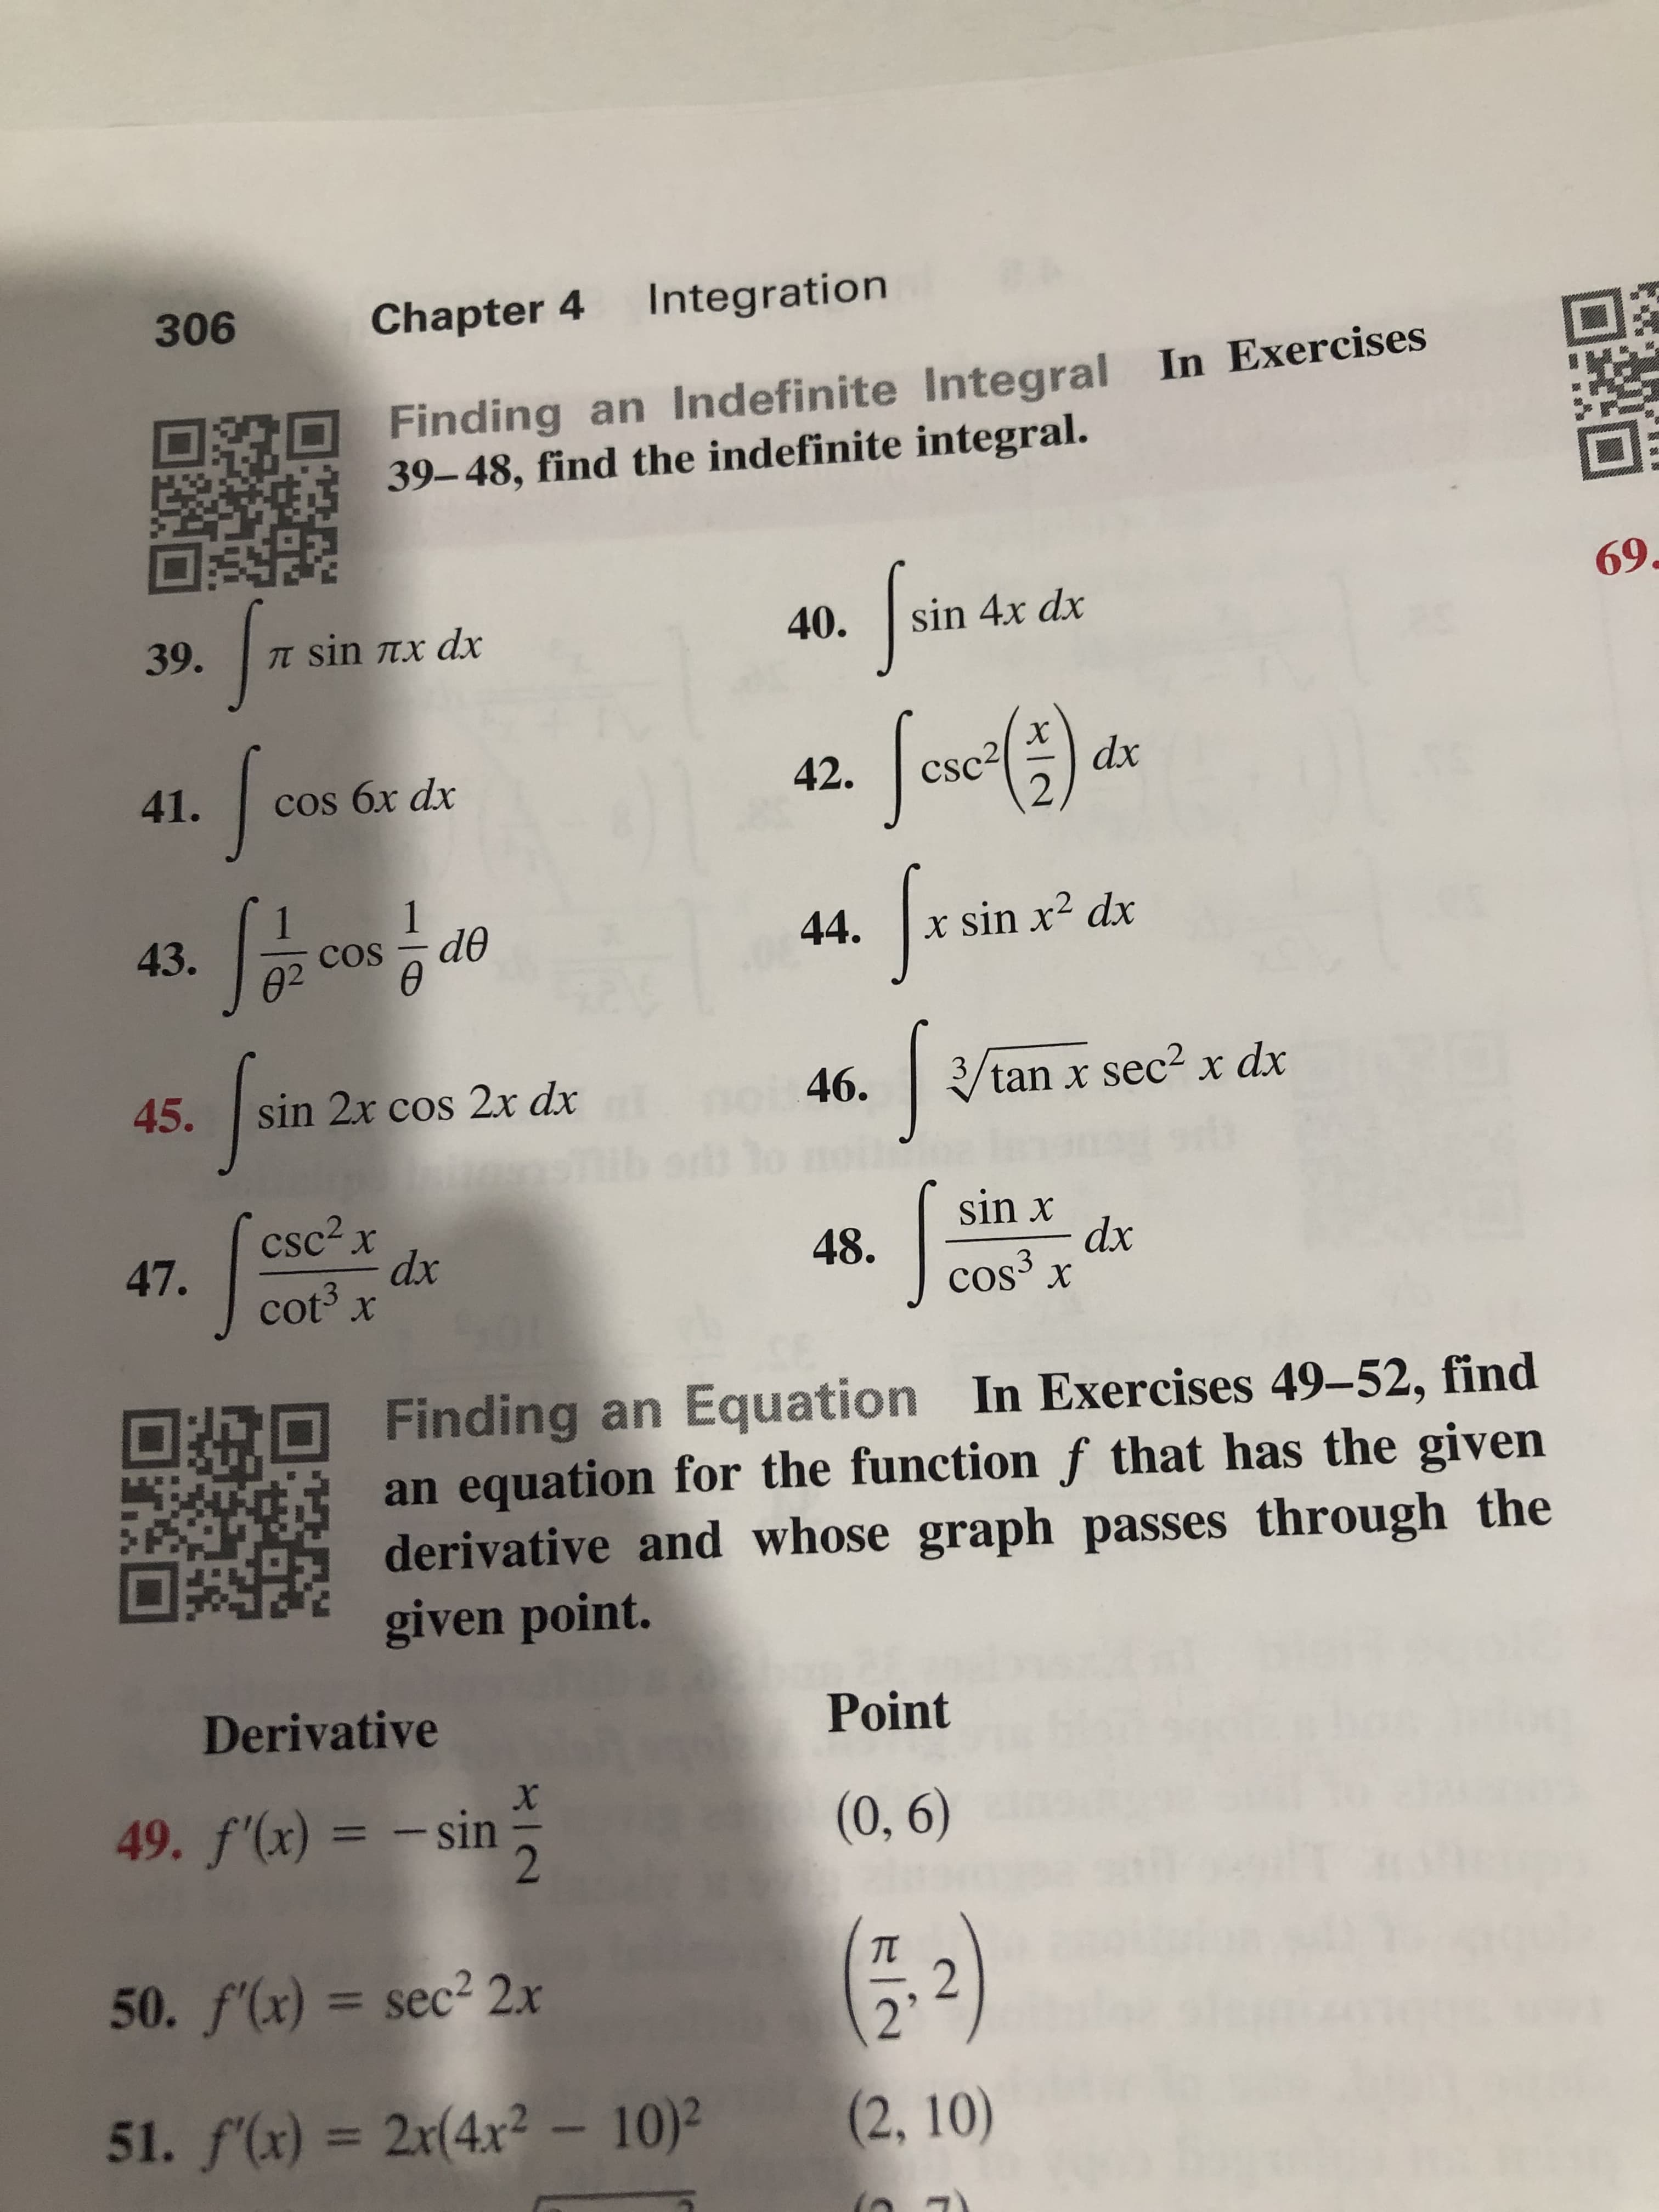 Integration
Chapter 4
306
Finding an Indefinite Integral In Exercises
39-48, find the indefinite integral.
69
sin 4x dx
40.
TT sin Tx dx
39.
dx
csc2
42.
41.
cos бx dx
x sin x2 dx
44.
de
43.
COS
02
3
tan x sec2 x dx
46.
sin 2x cos 2x dx
45.
sin x
dx
cos3 x
csc2x
dx
cot3 x
48.
47.
Finding an Equation In Exercises 49-52, find
an equation for the function f that has the given
derivative and whose graph passes through the
given point.
Derivative
Point
(0, 6)
49. f(x)
- sin
11
=
50. f'(x) = sec2 2.x
2
51. f(x) = 2x(4x2- 10)2
(2, 10)
